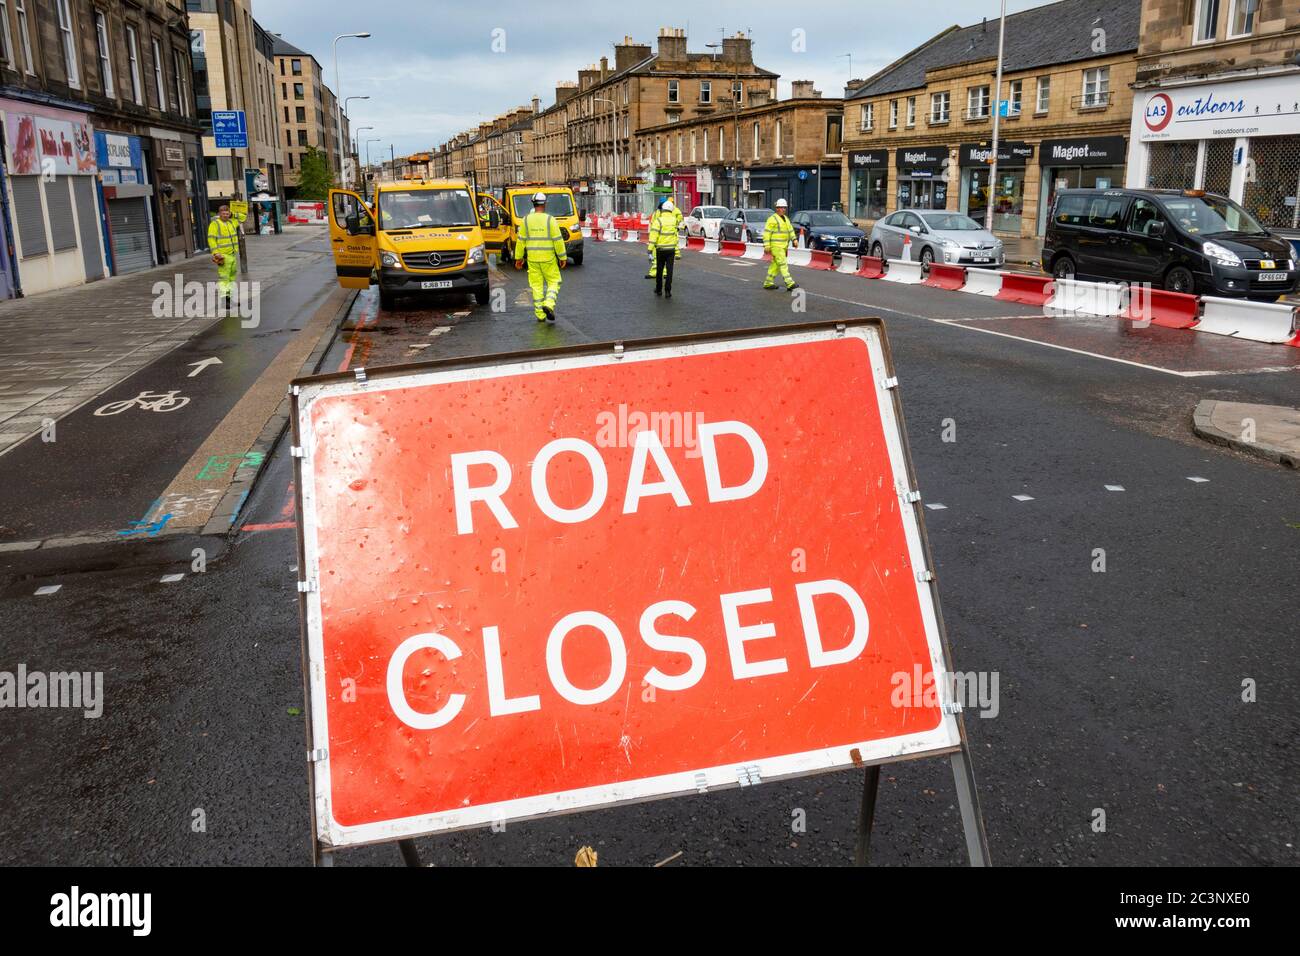 Edinburgh, Scotland, UK. 21 June, 2020. Traffic management work and lane closures on Leith Walk signals the start of construction work for the new Edinburgh tram line extension to Newhaven. Disruption to traffic and businesses on Leith Walk is expected to last for over a year. Iain Masterton/Alamy Live News Stock Photo